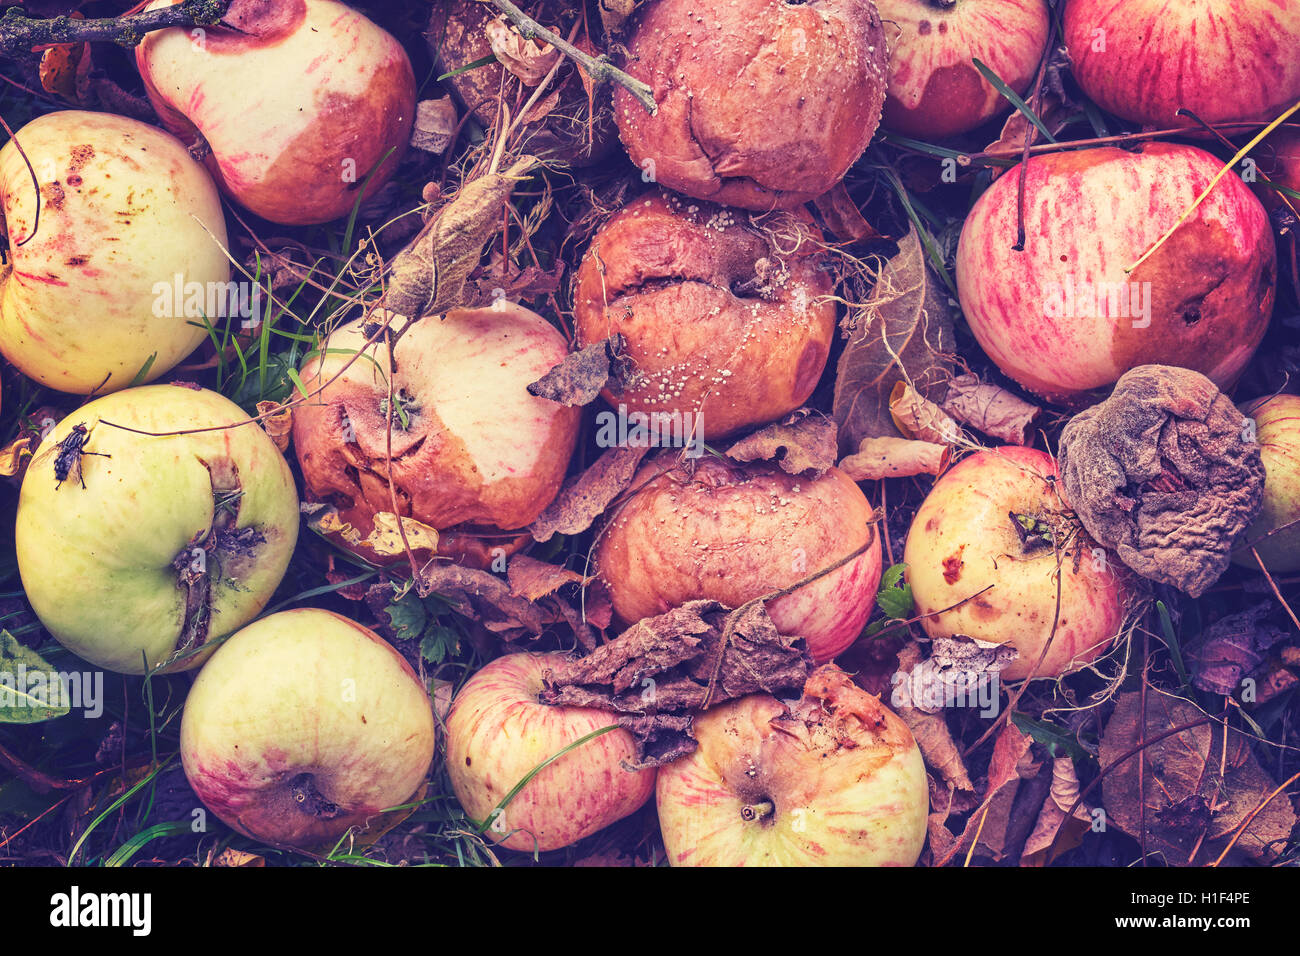 Vintage toned close up picture of rotten apples in a garden. Stock Photo